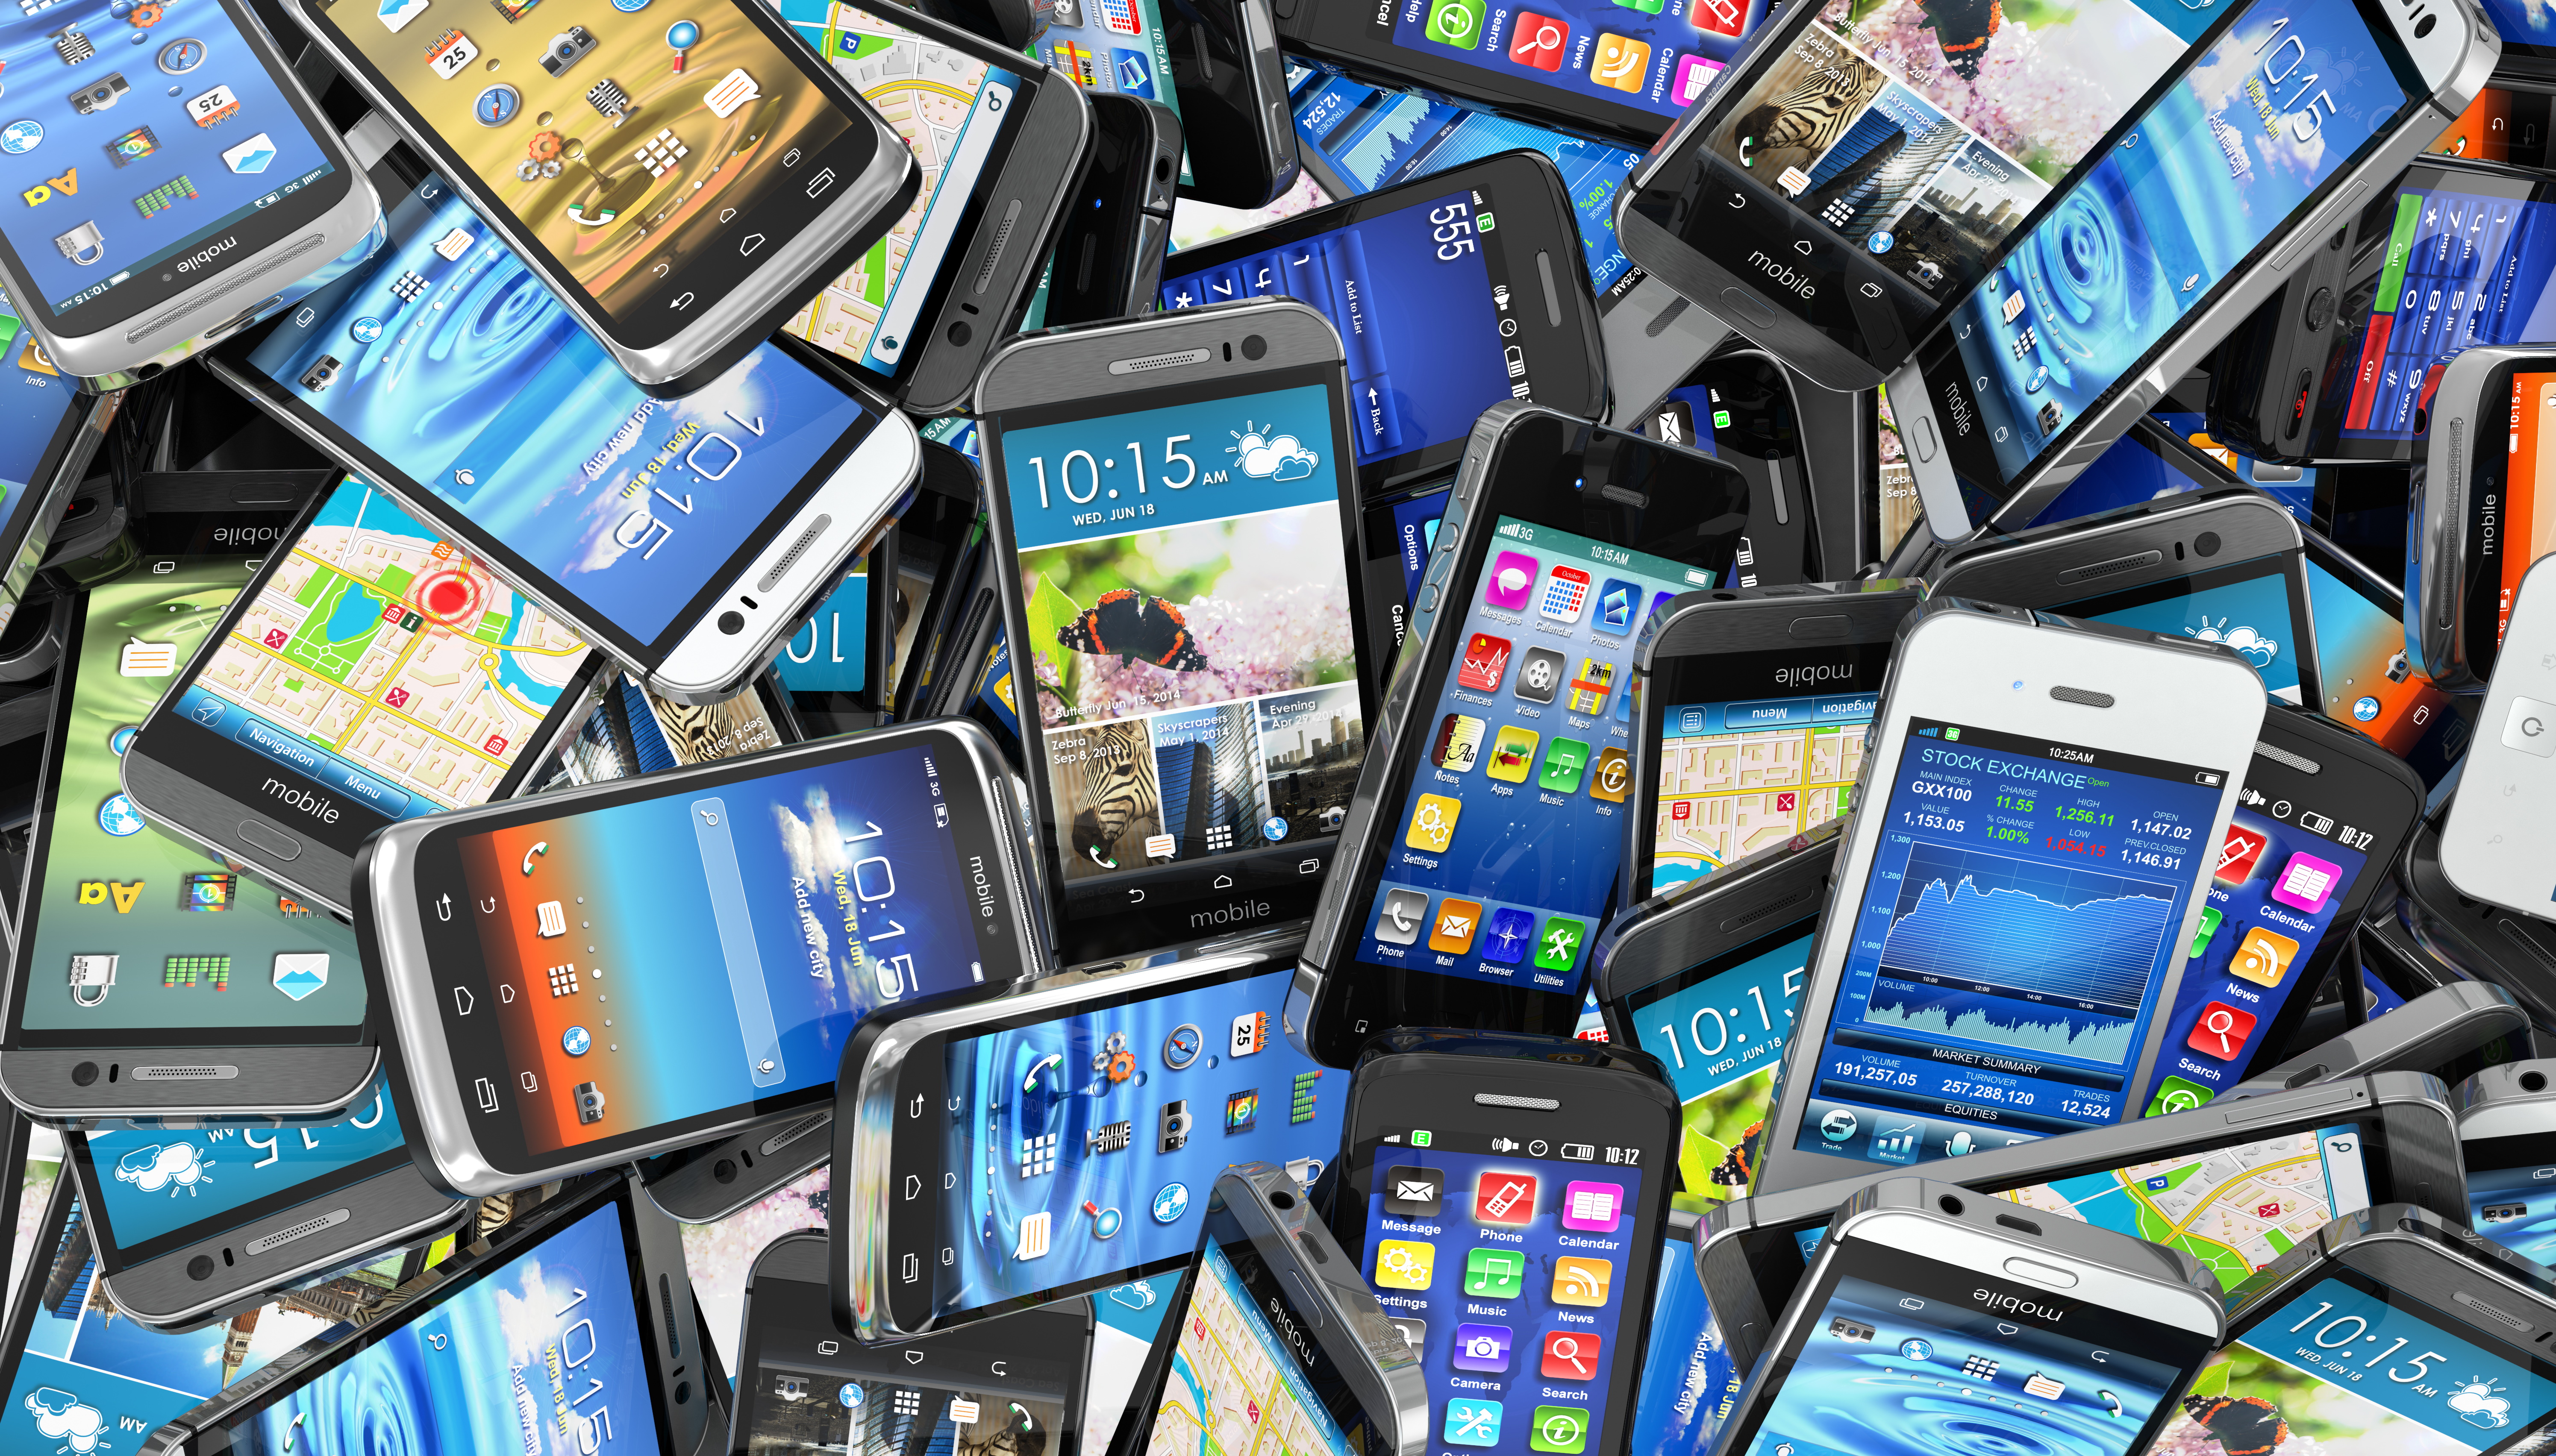 Is It Safe to Use an Old or Used Phone? Here's What You Should